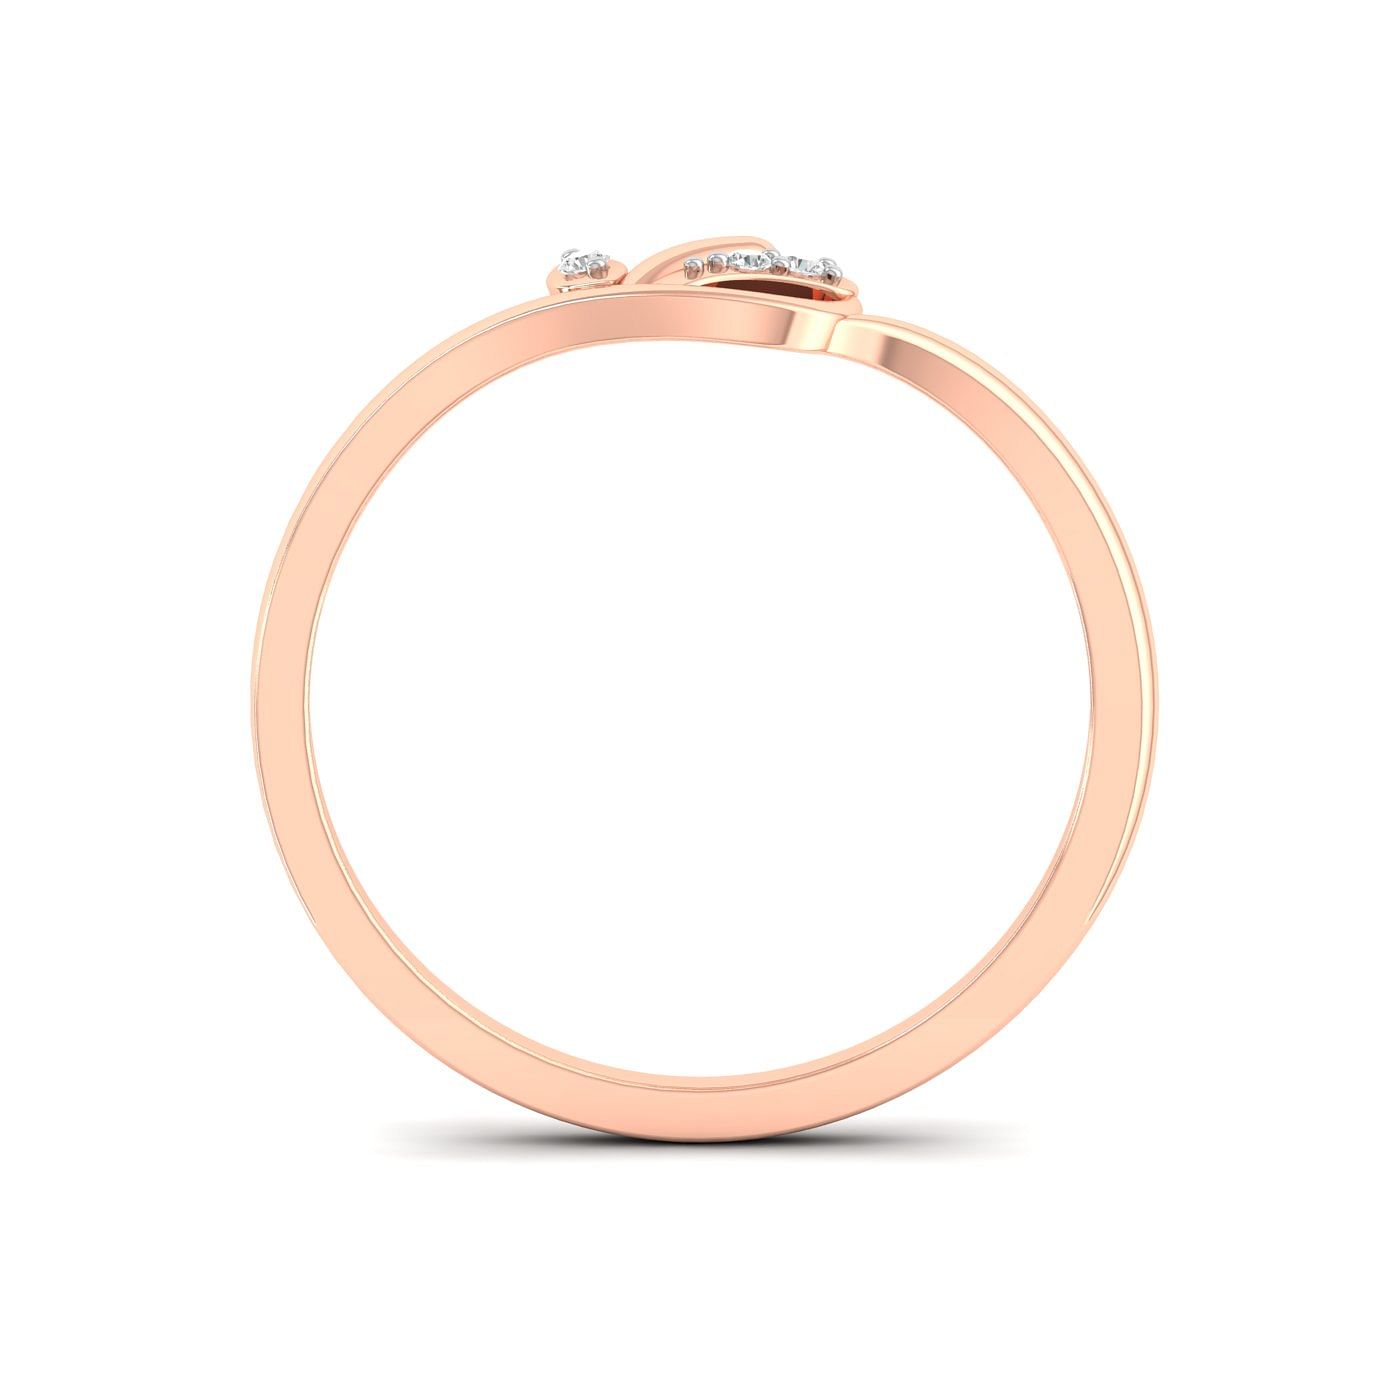 Light weight rose gold Appy Three Stone Diamond Ring for her